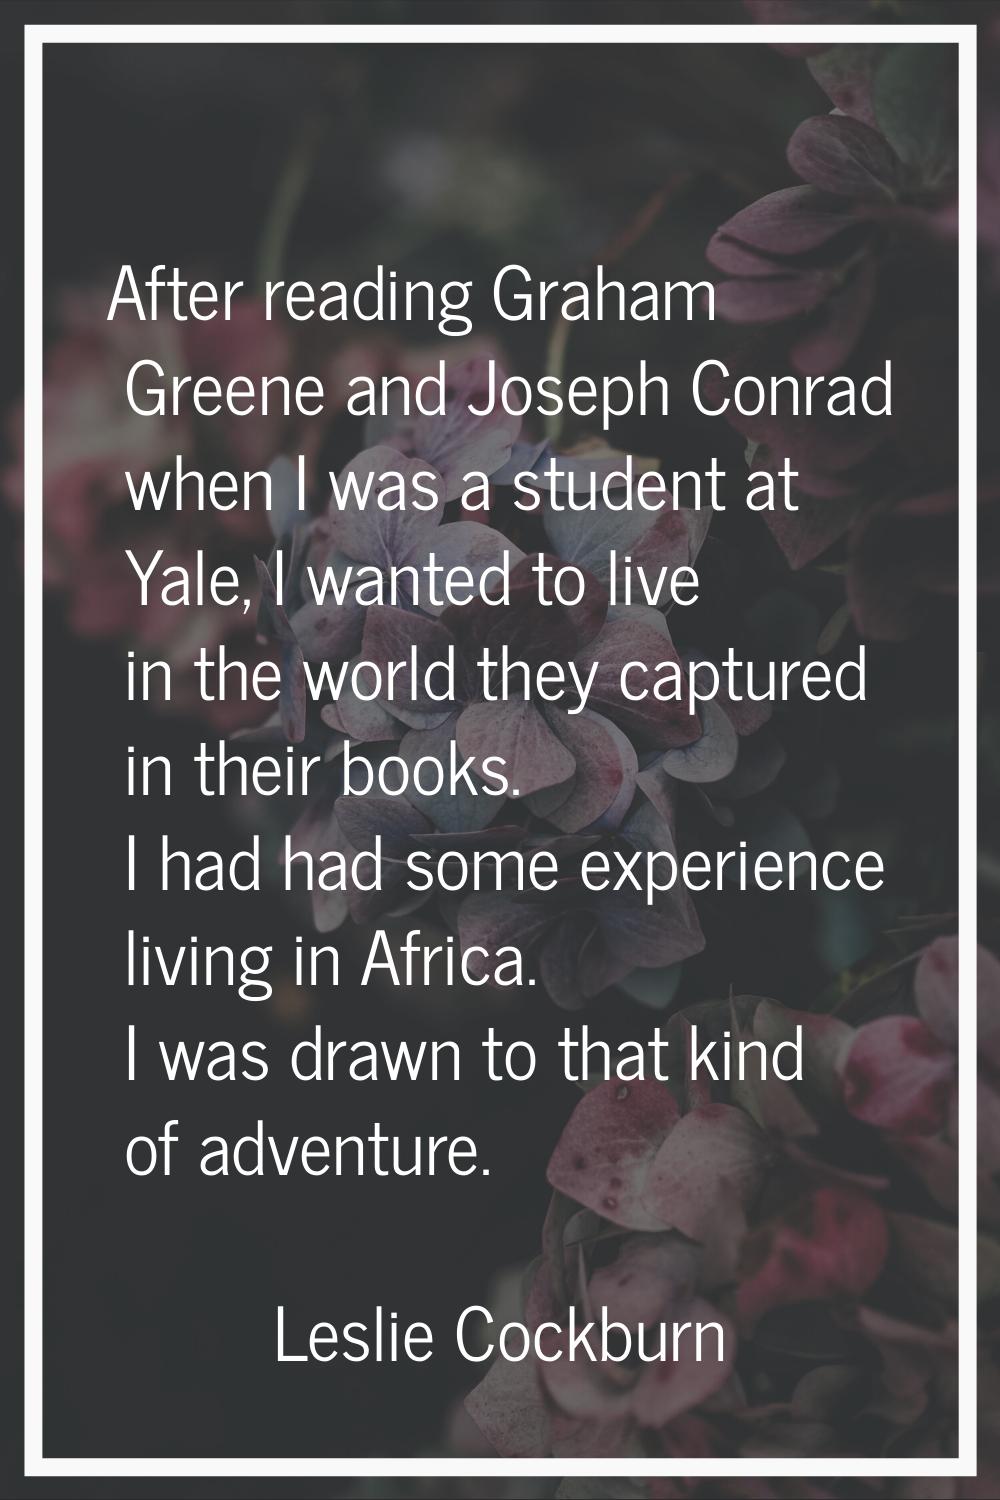 After reading Graham Greene and Joseph Conrad when I was a student at Yale, I wanted to live in the